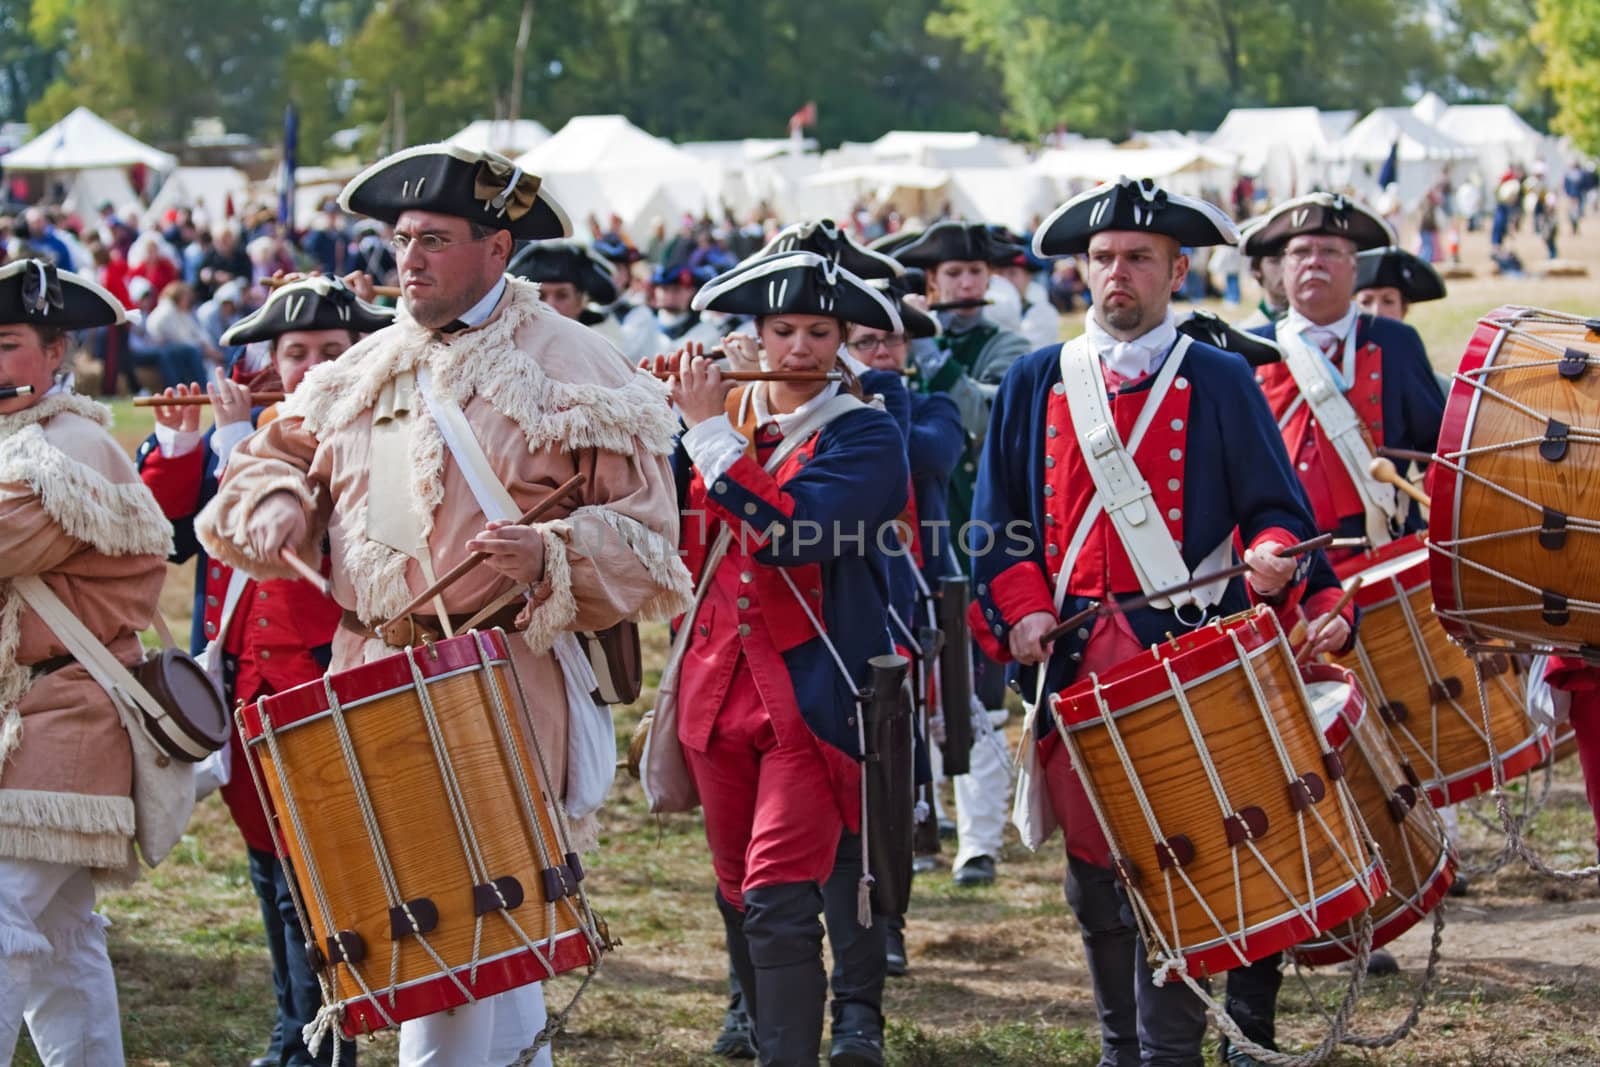 WEST LAFAYETTE, INDIANA - OCTOBER 3: Fifers and drummers march in a parade at the Feast of the Hunter's Moon in West Lafayette, Indiana, October 3, 2010. The Feast re-creates the annual fall gathering of the French and Native Americans which took place at Fort Ouiatenon during the mid 1700s.